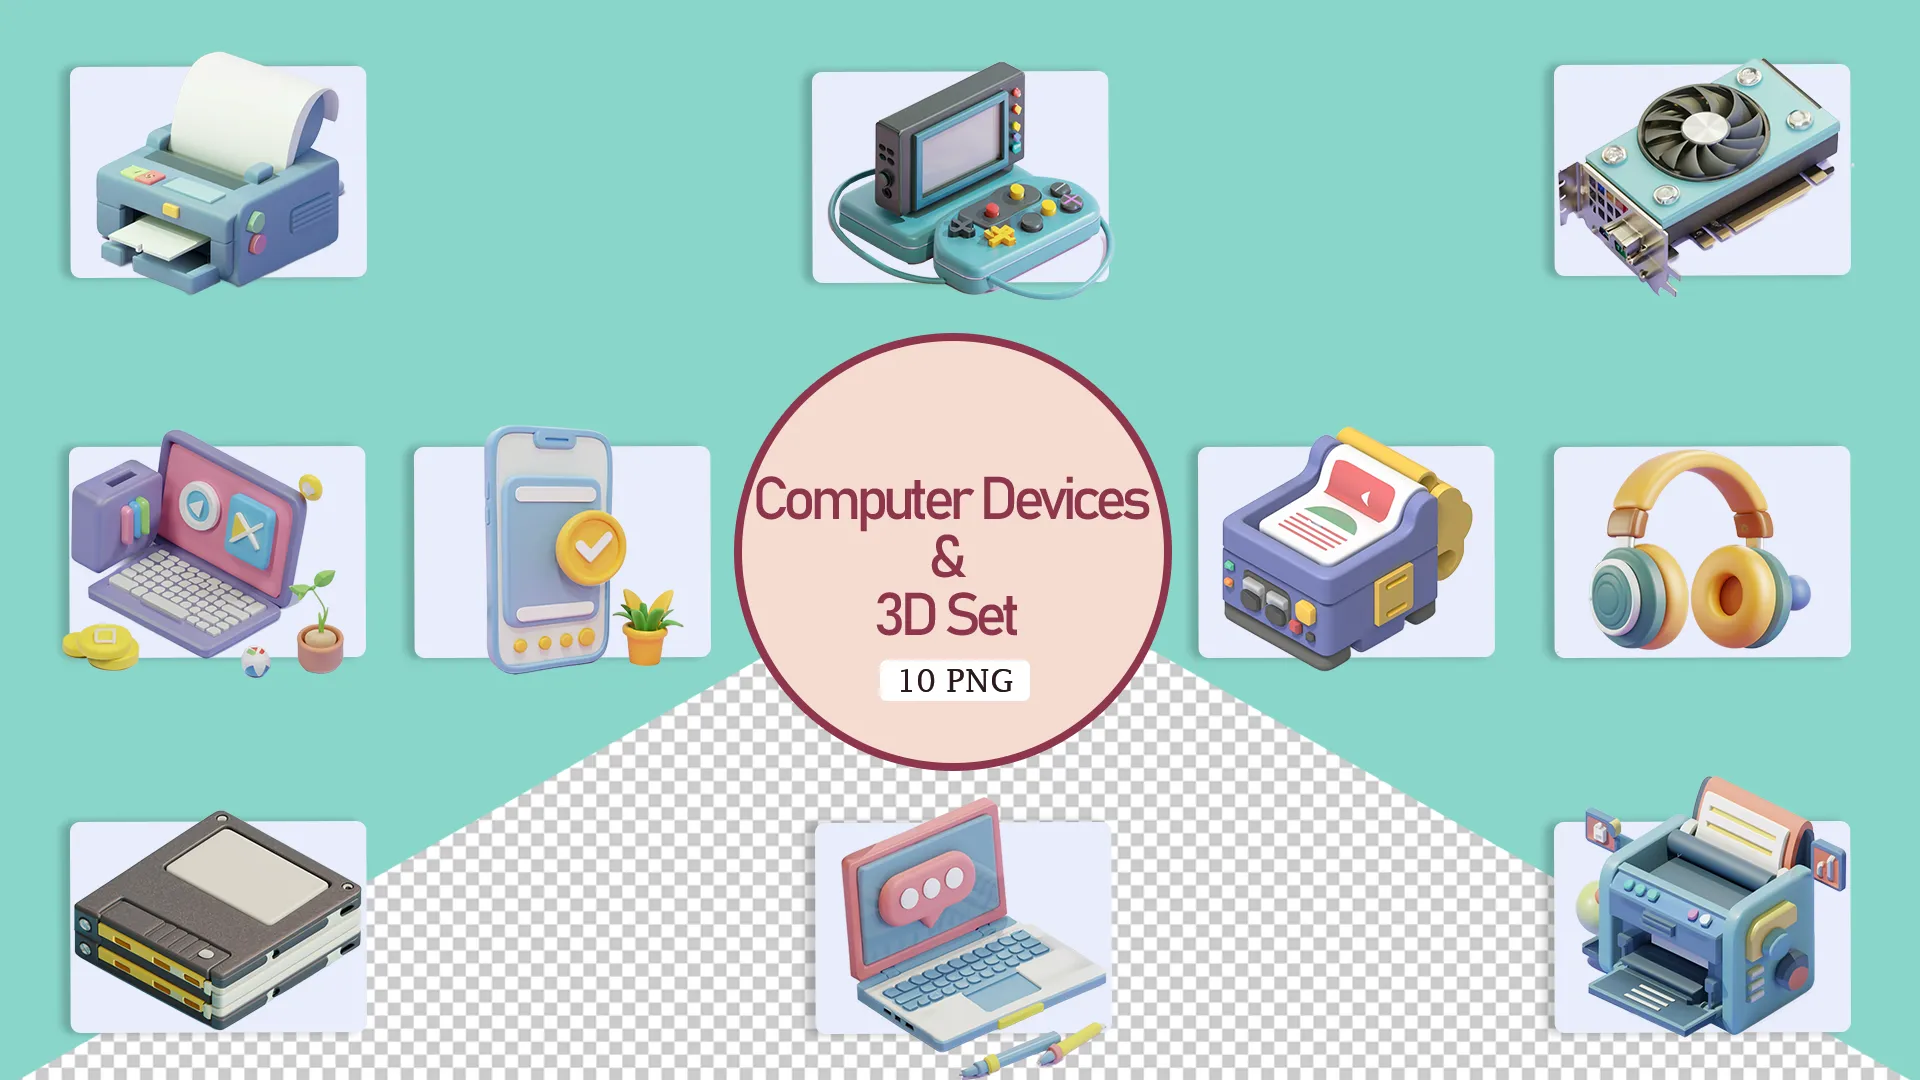 Creative 3D Computer Devices Pack